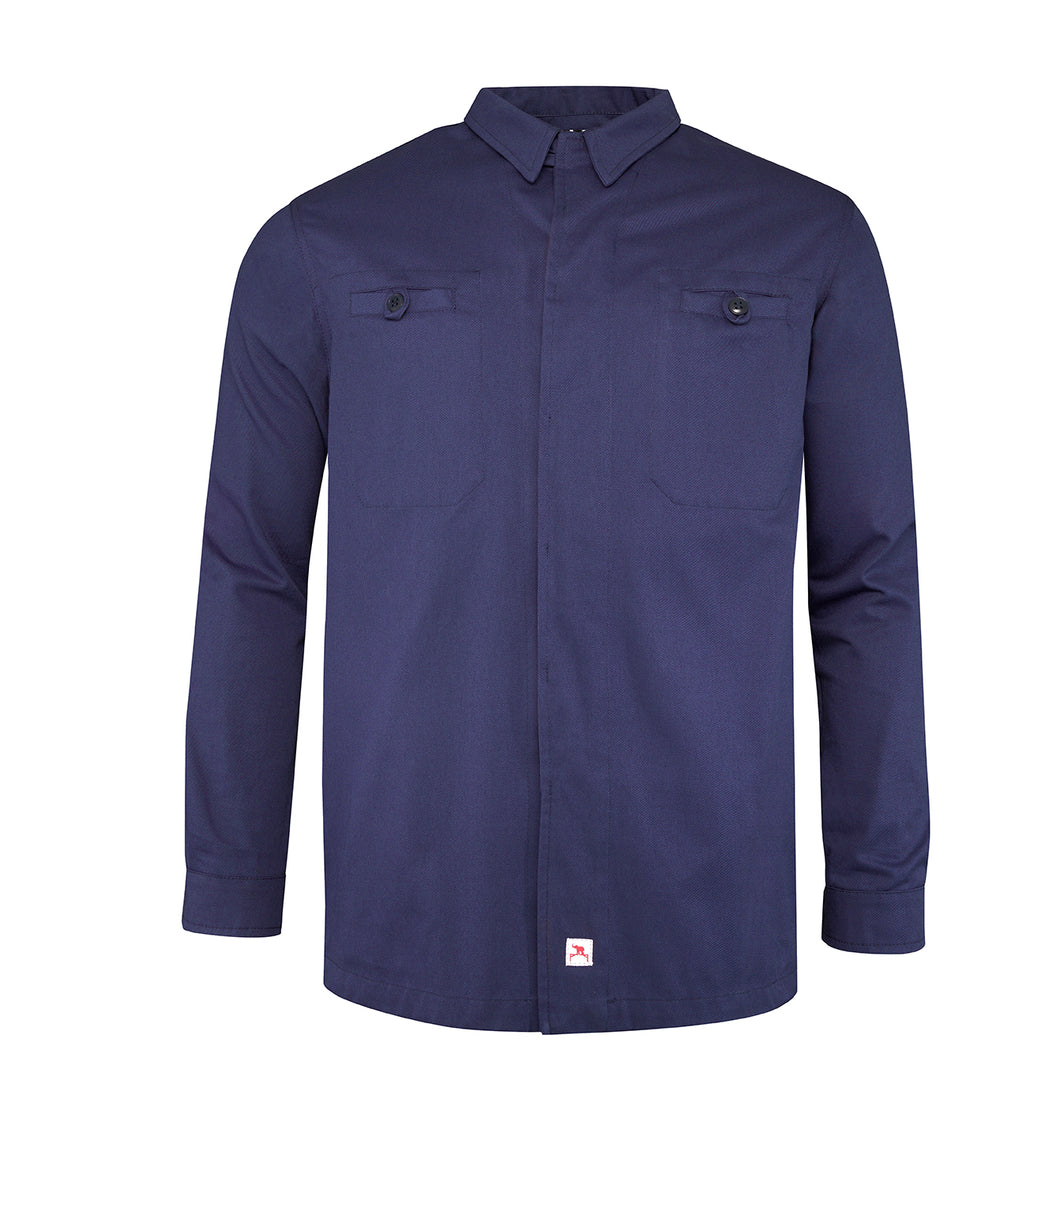 The Forrester Navy Blue Overshirt